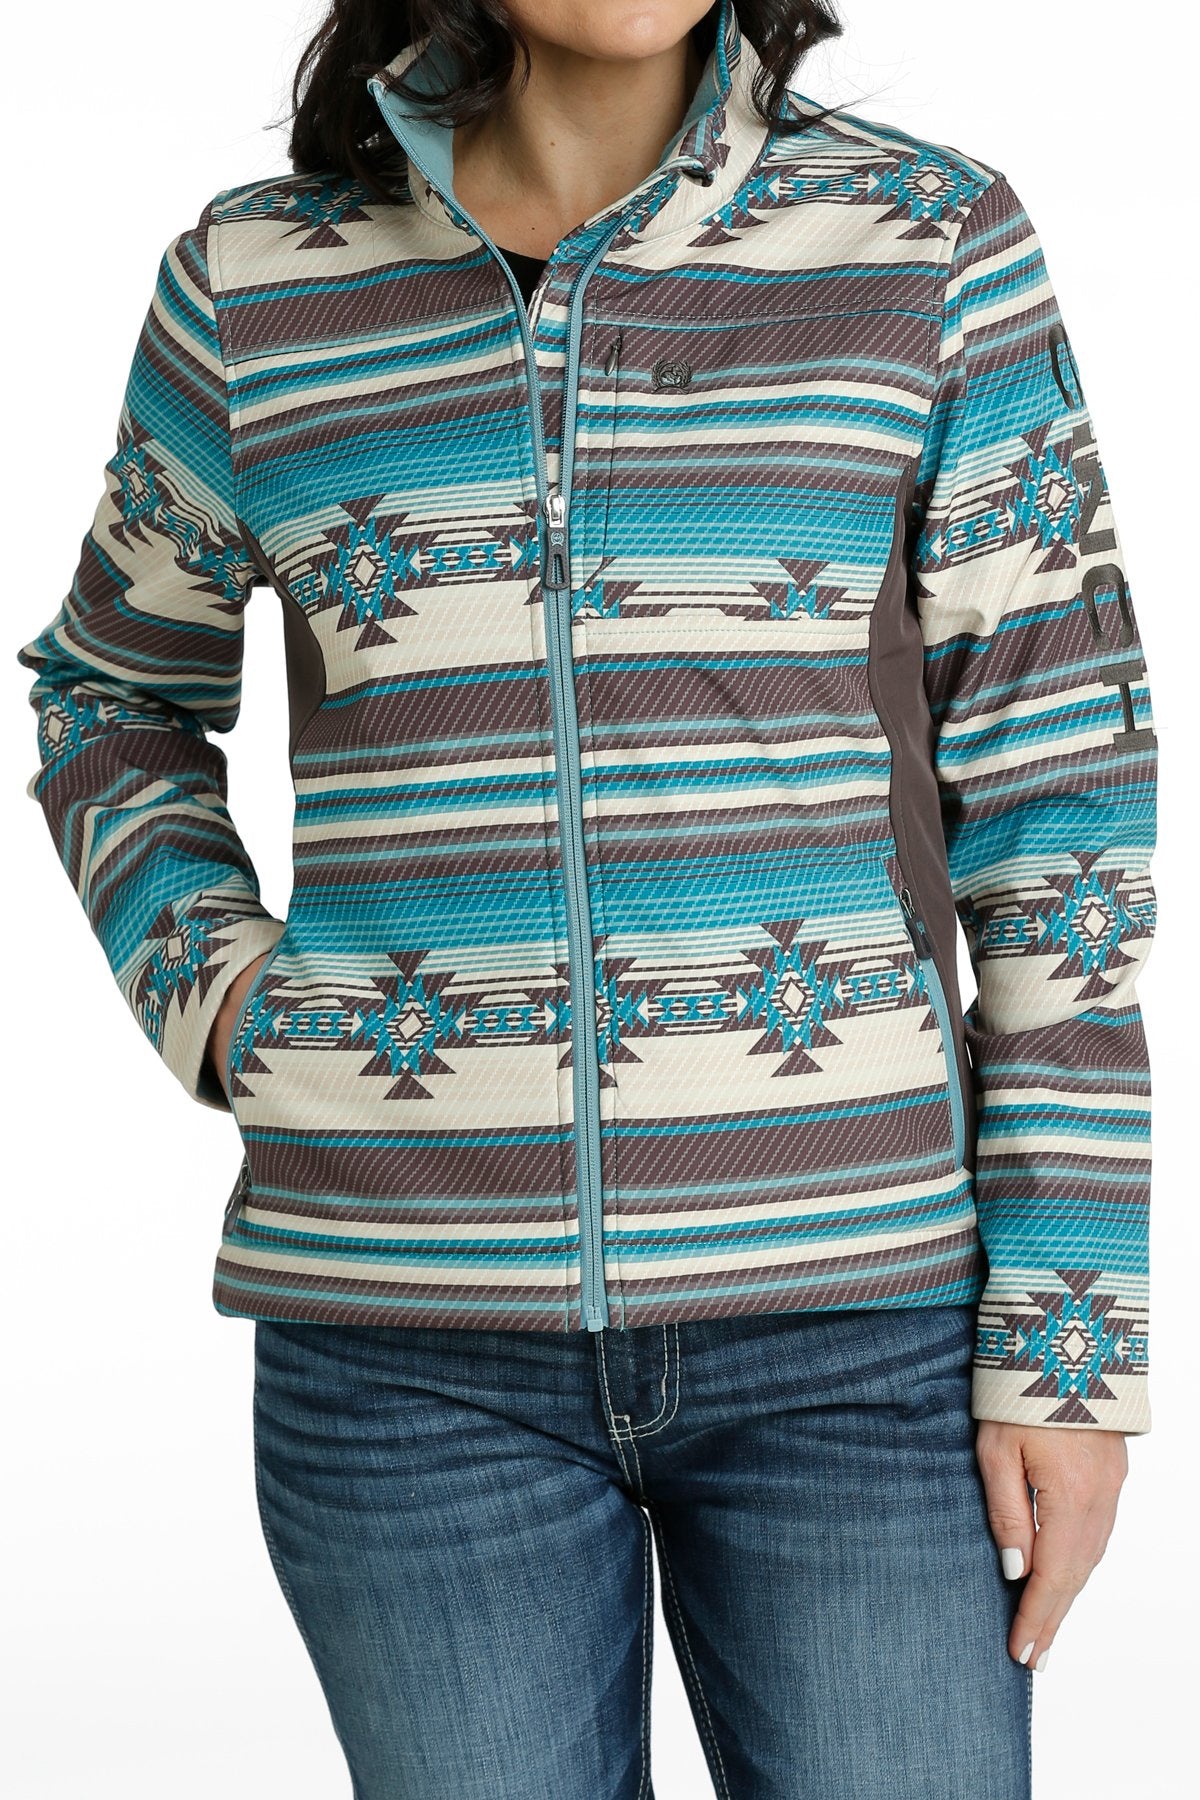 Ladies Cinch Concealed Carry Bonded Jacket - Turquoise Aztec (7012105519181)